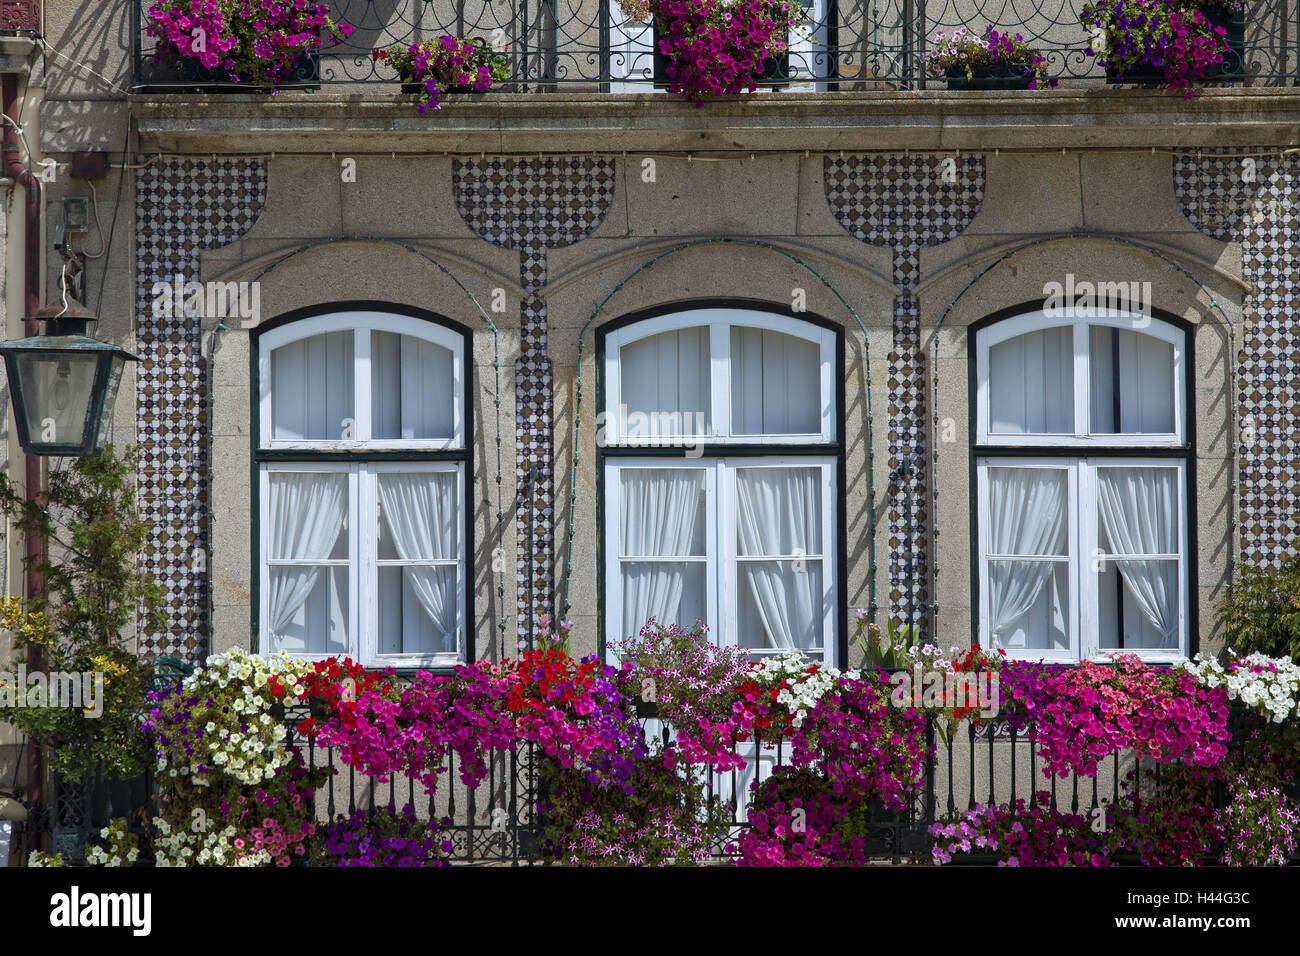 Portugal, Ponte de Lima, old town, house facade, balconies, balcony flowers, Stock Photo